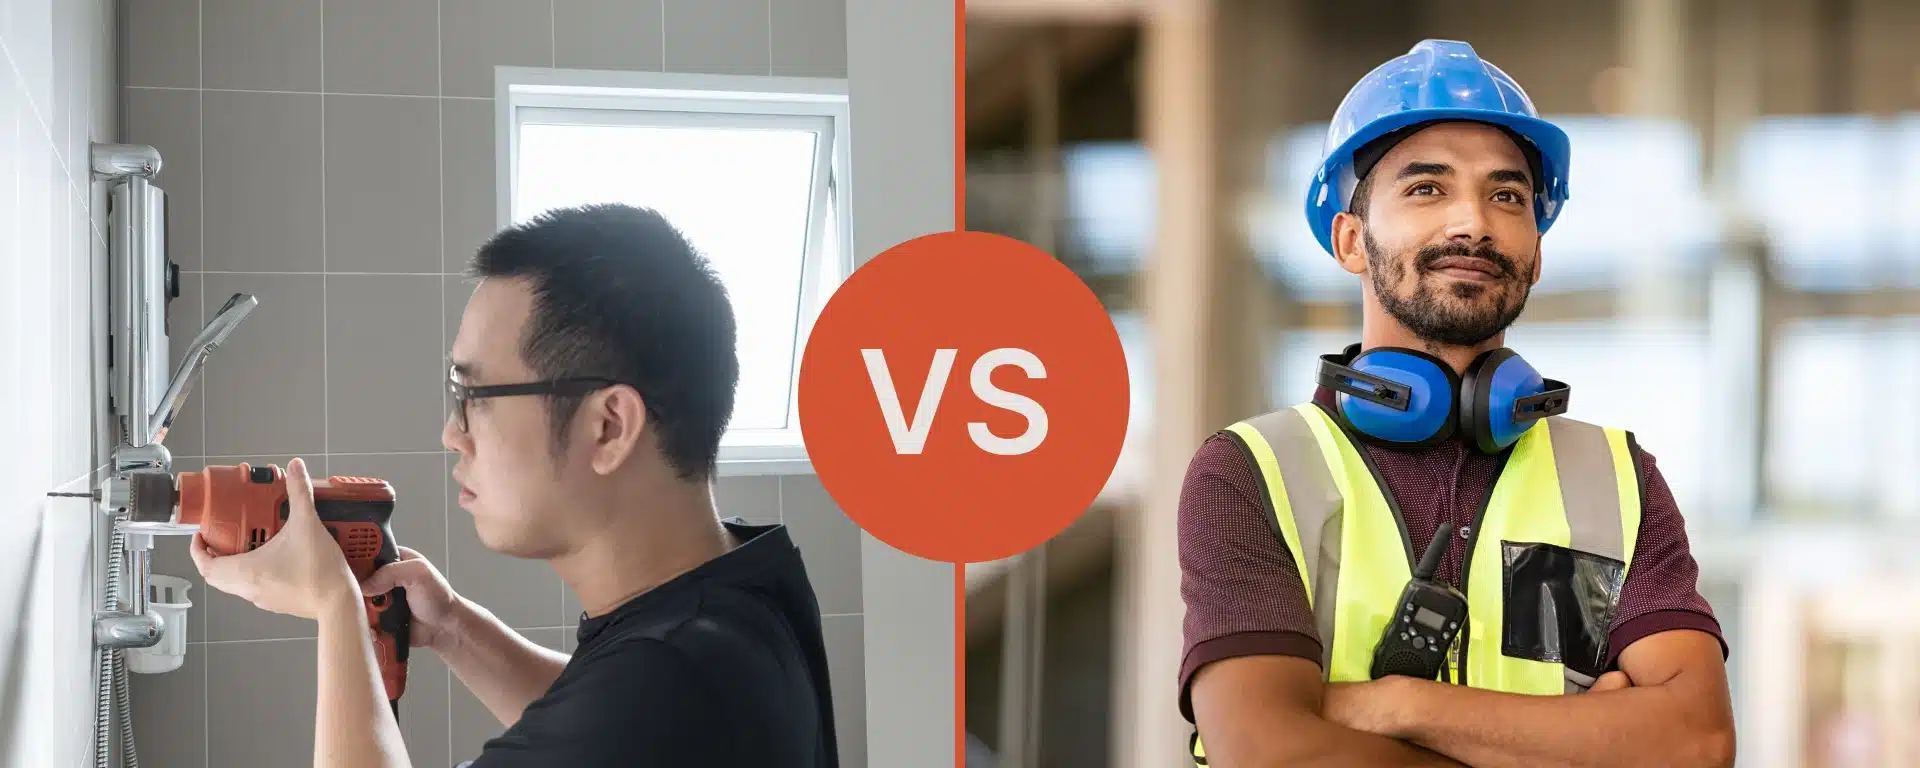 A person doing DIY renovations vs a contractor with arms crossed on the right.